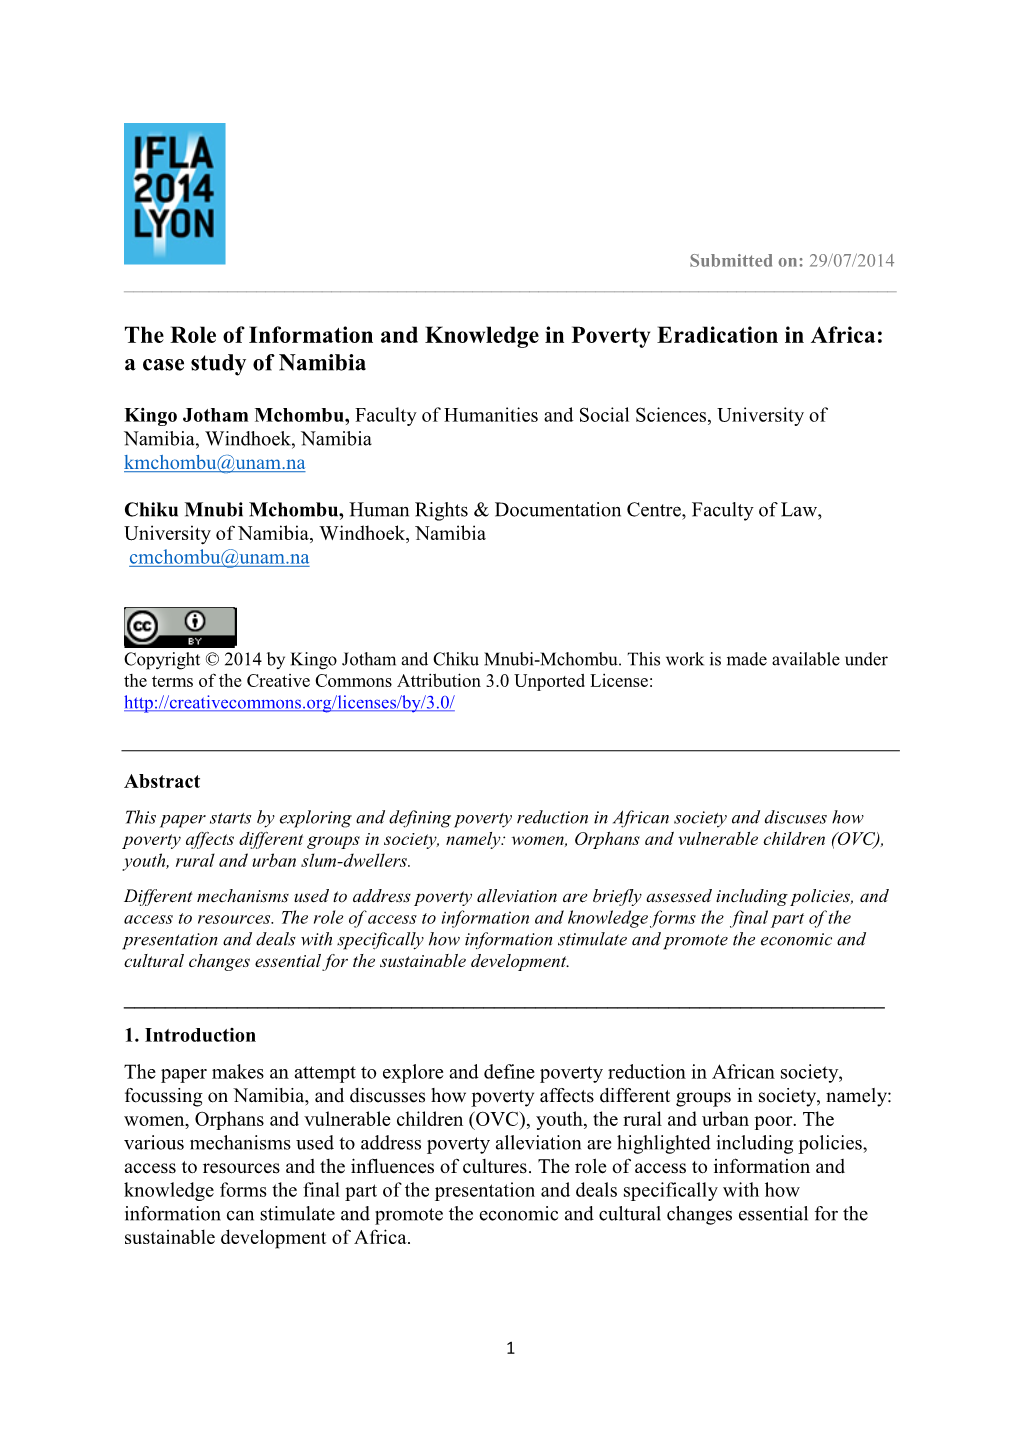 The Role of Information and Knowledge in Poverty Eradication in Africa: a Case Study of Namibia